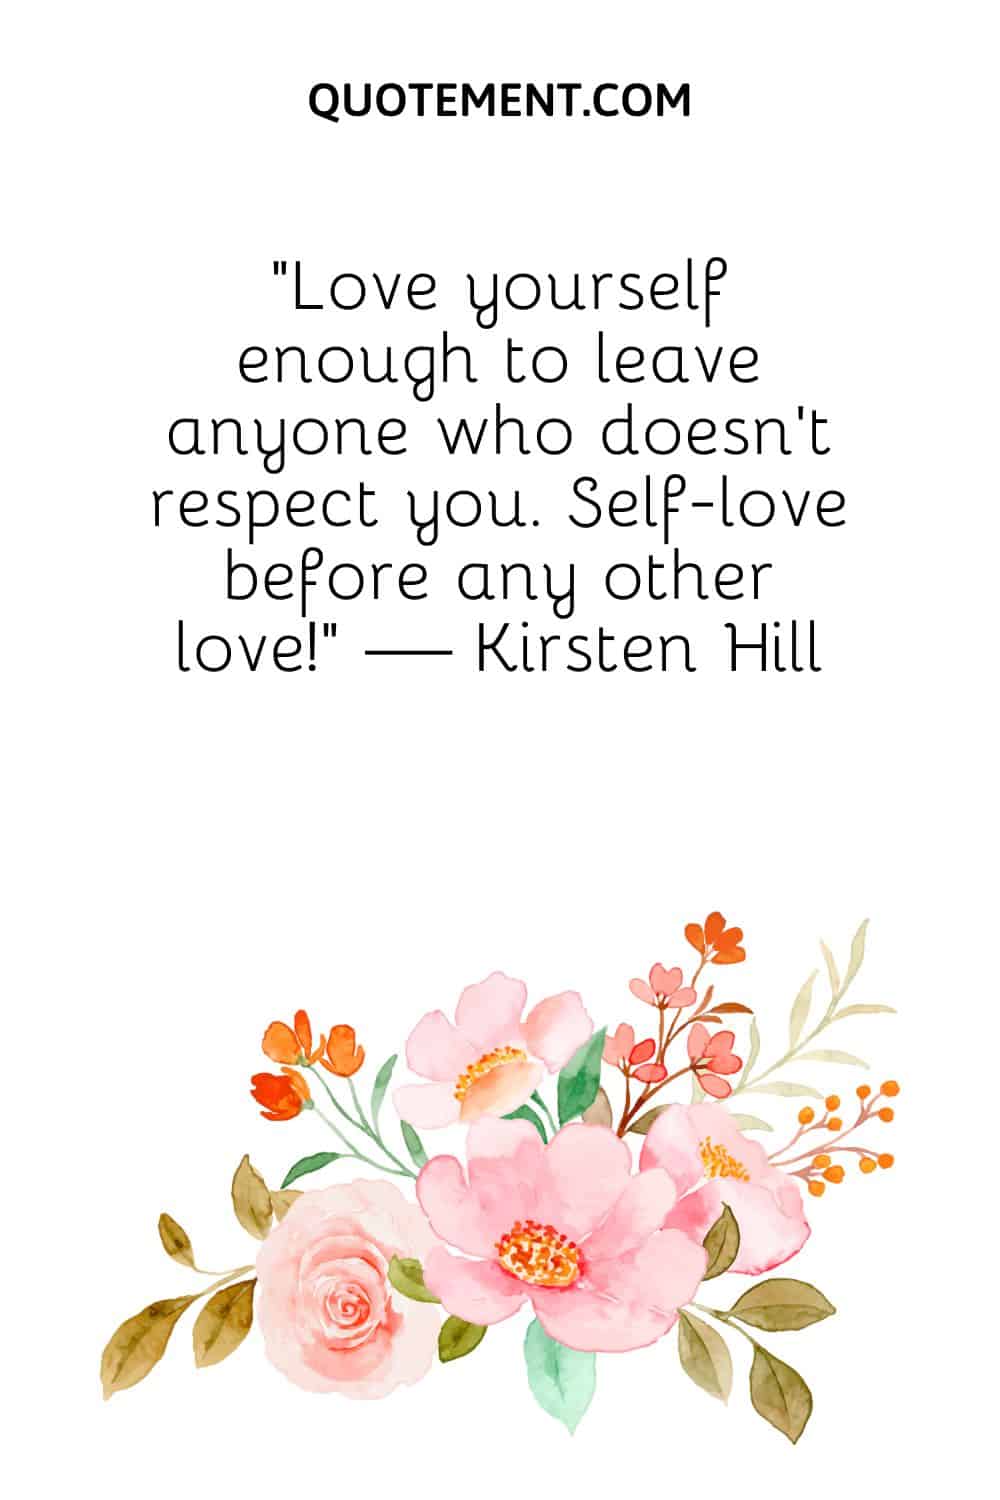 Love yourself enough to leave anyone who doesn’t respect you.